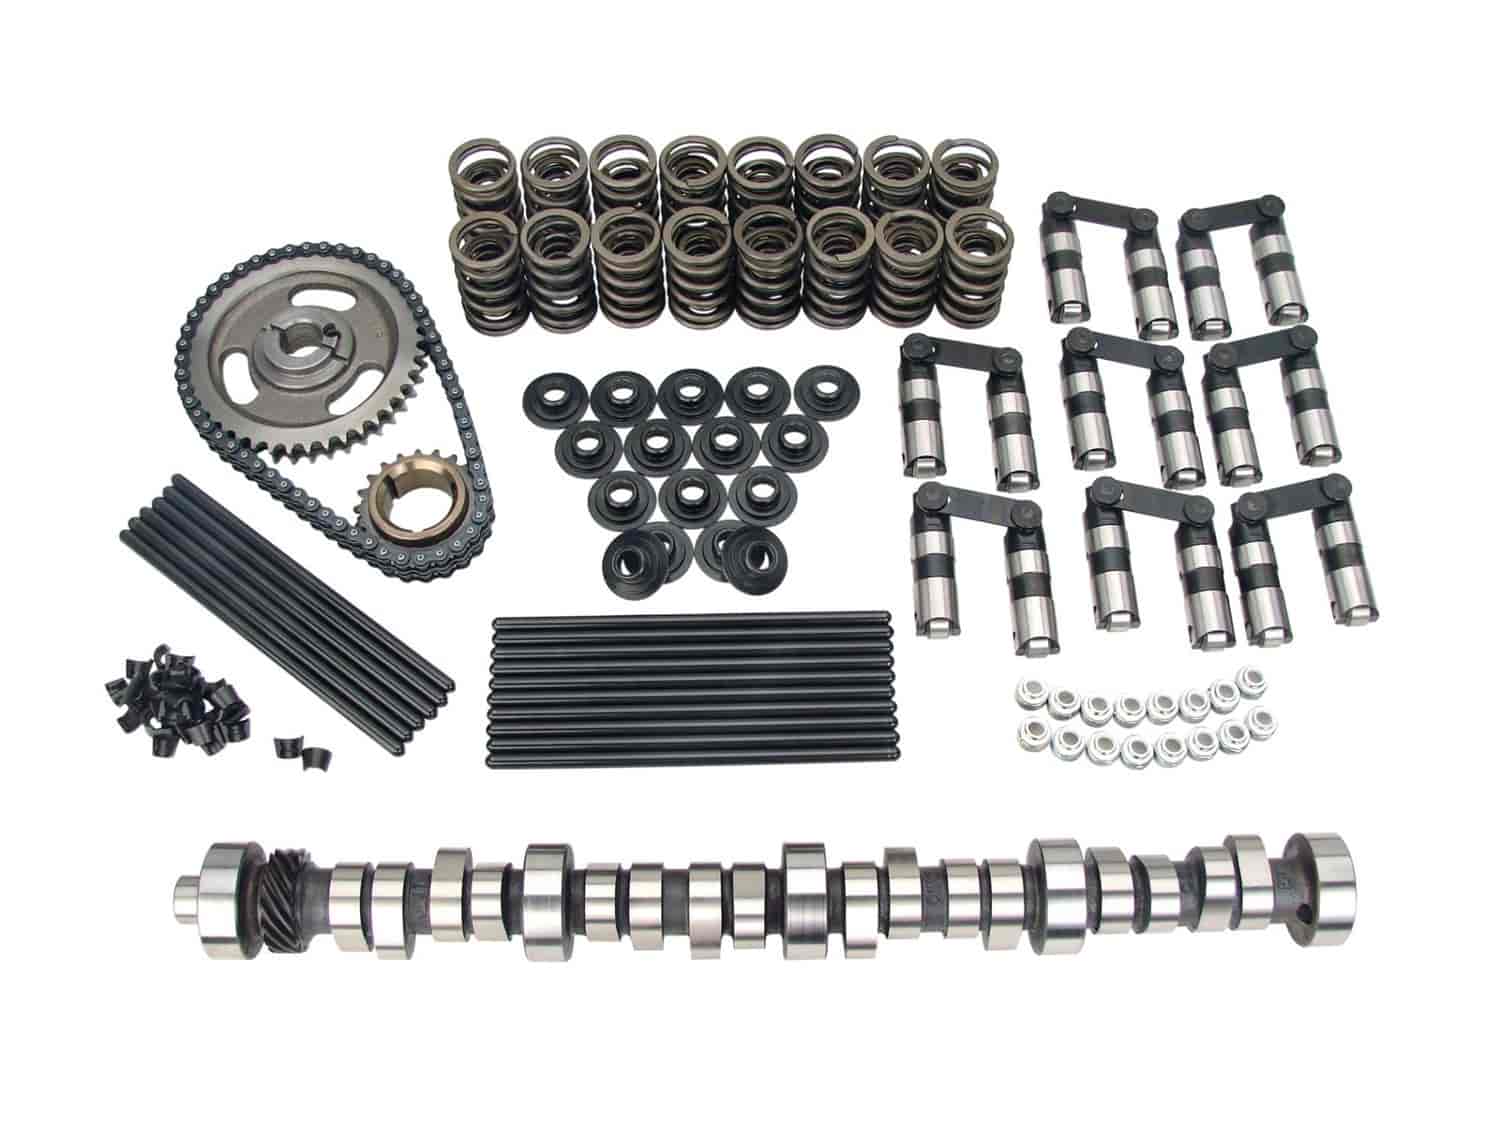 Thumpr Retro-Fit Hydraulic Roller Camshaft Complete Kit Lift: .531"/.515"